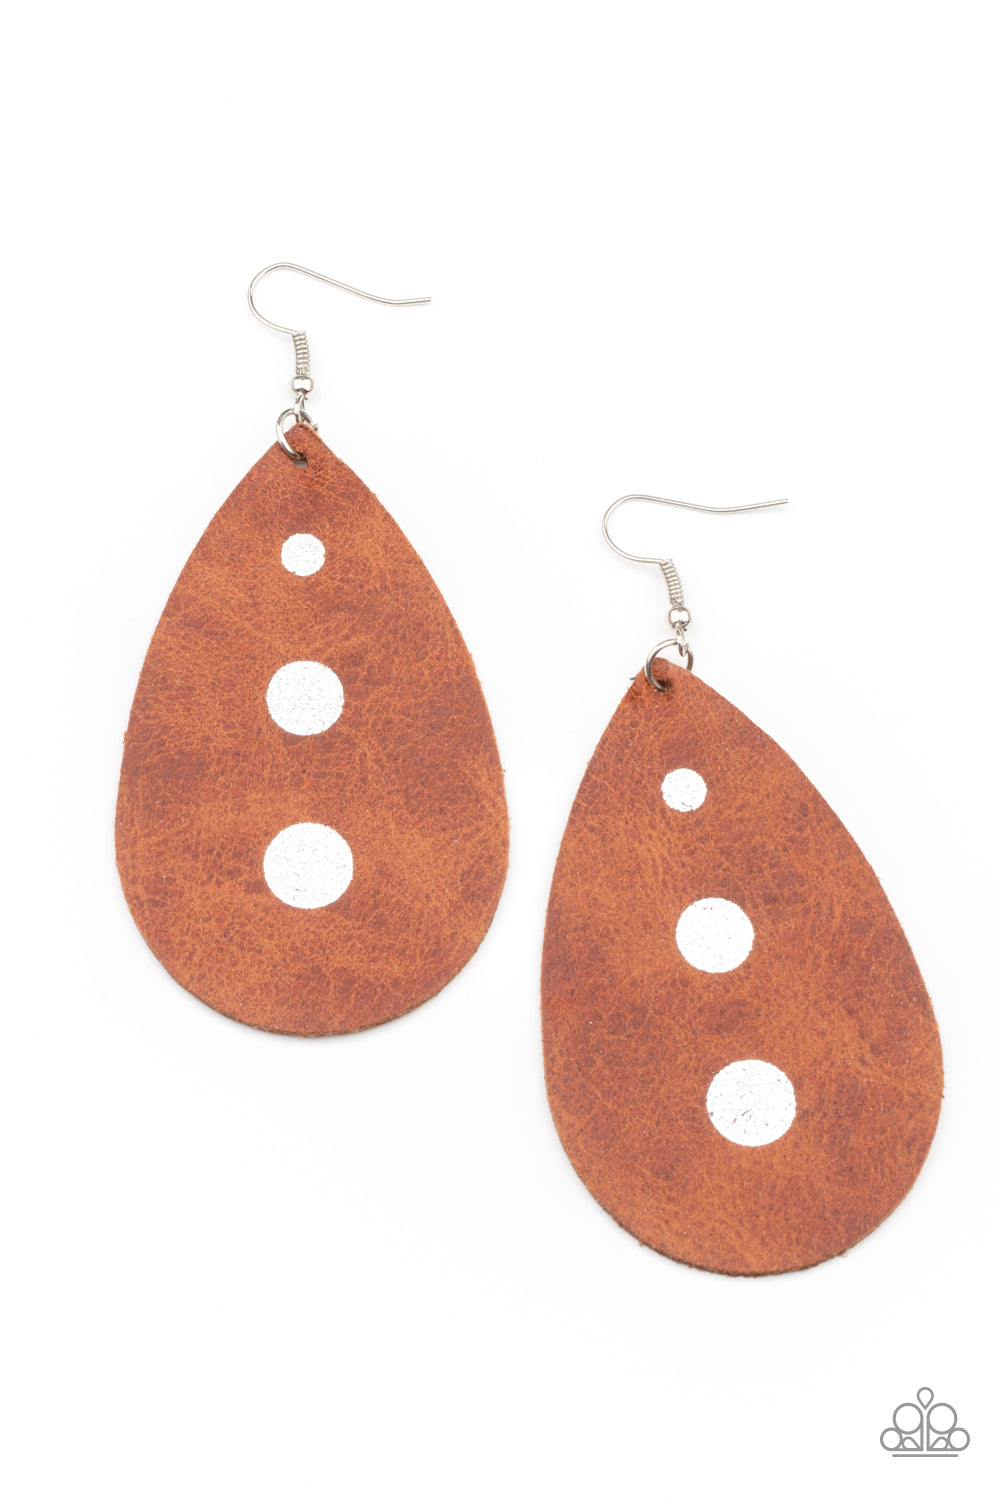 Paparazzi Accessories, distressed leather teardrop framed earrings with a kiss of white dots. Oh so sassy.